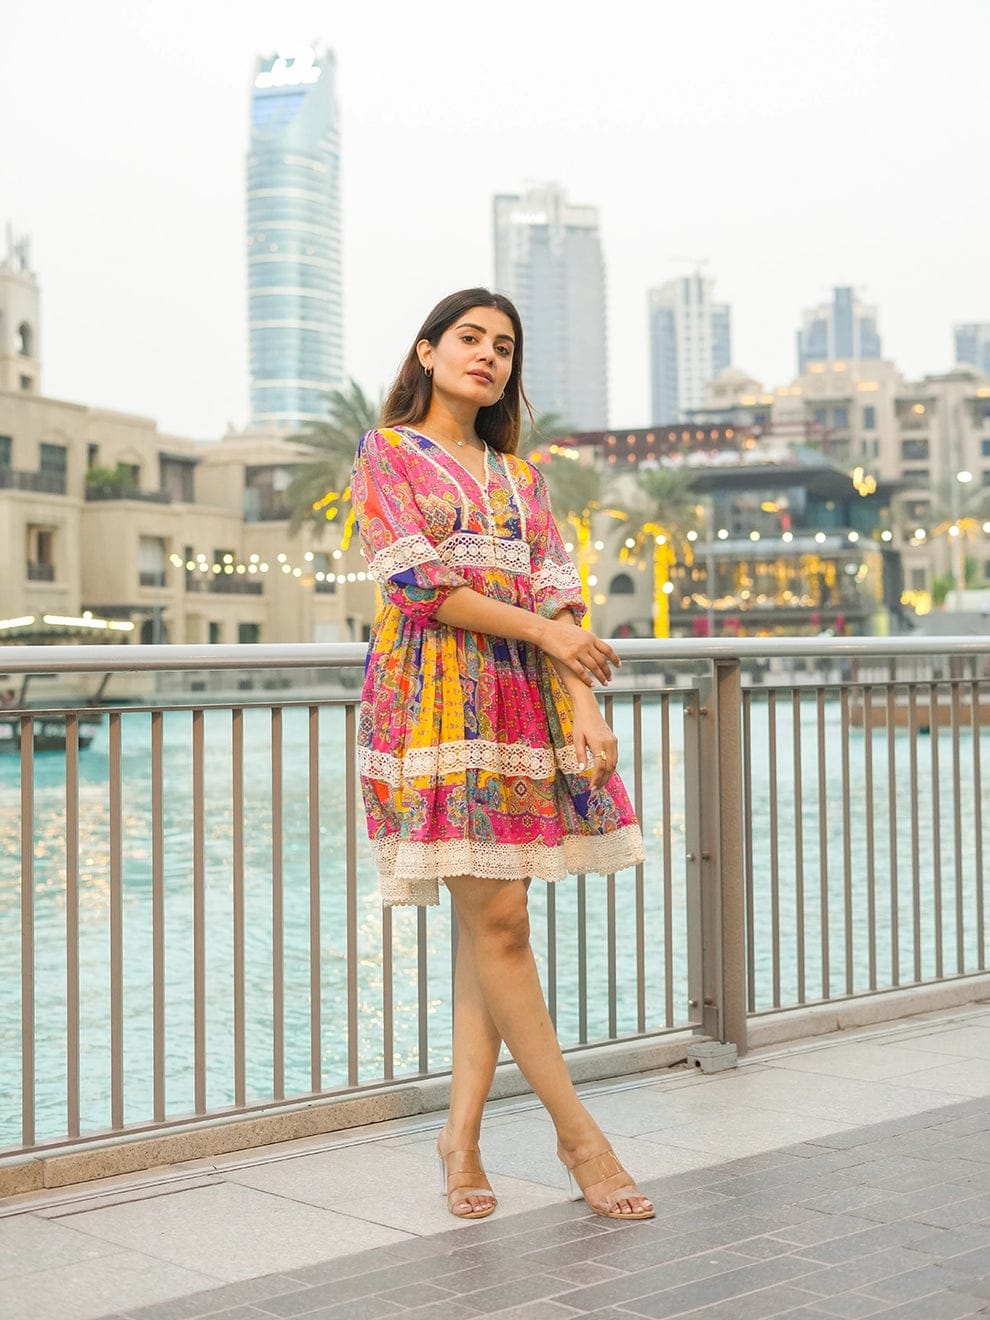 Chromatic Charm: Short Dress with Multicolored Lining